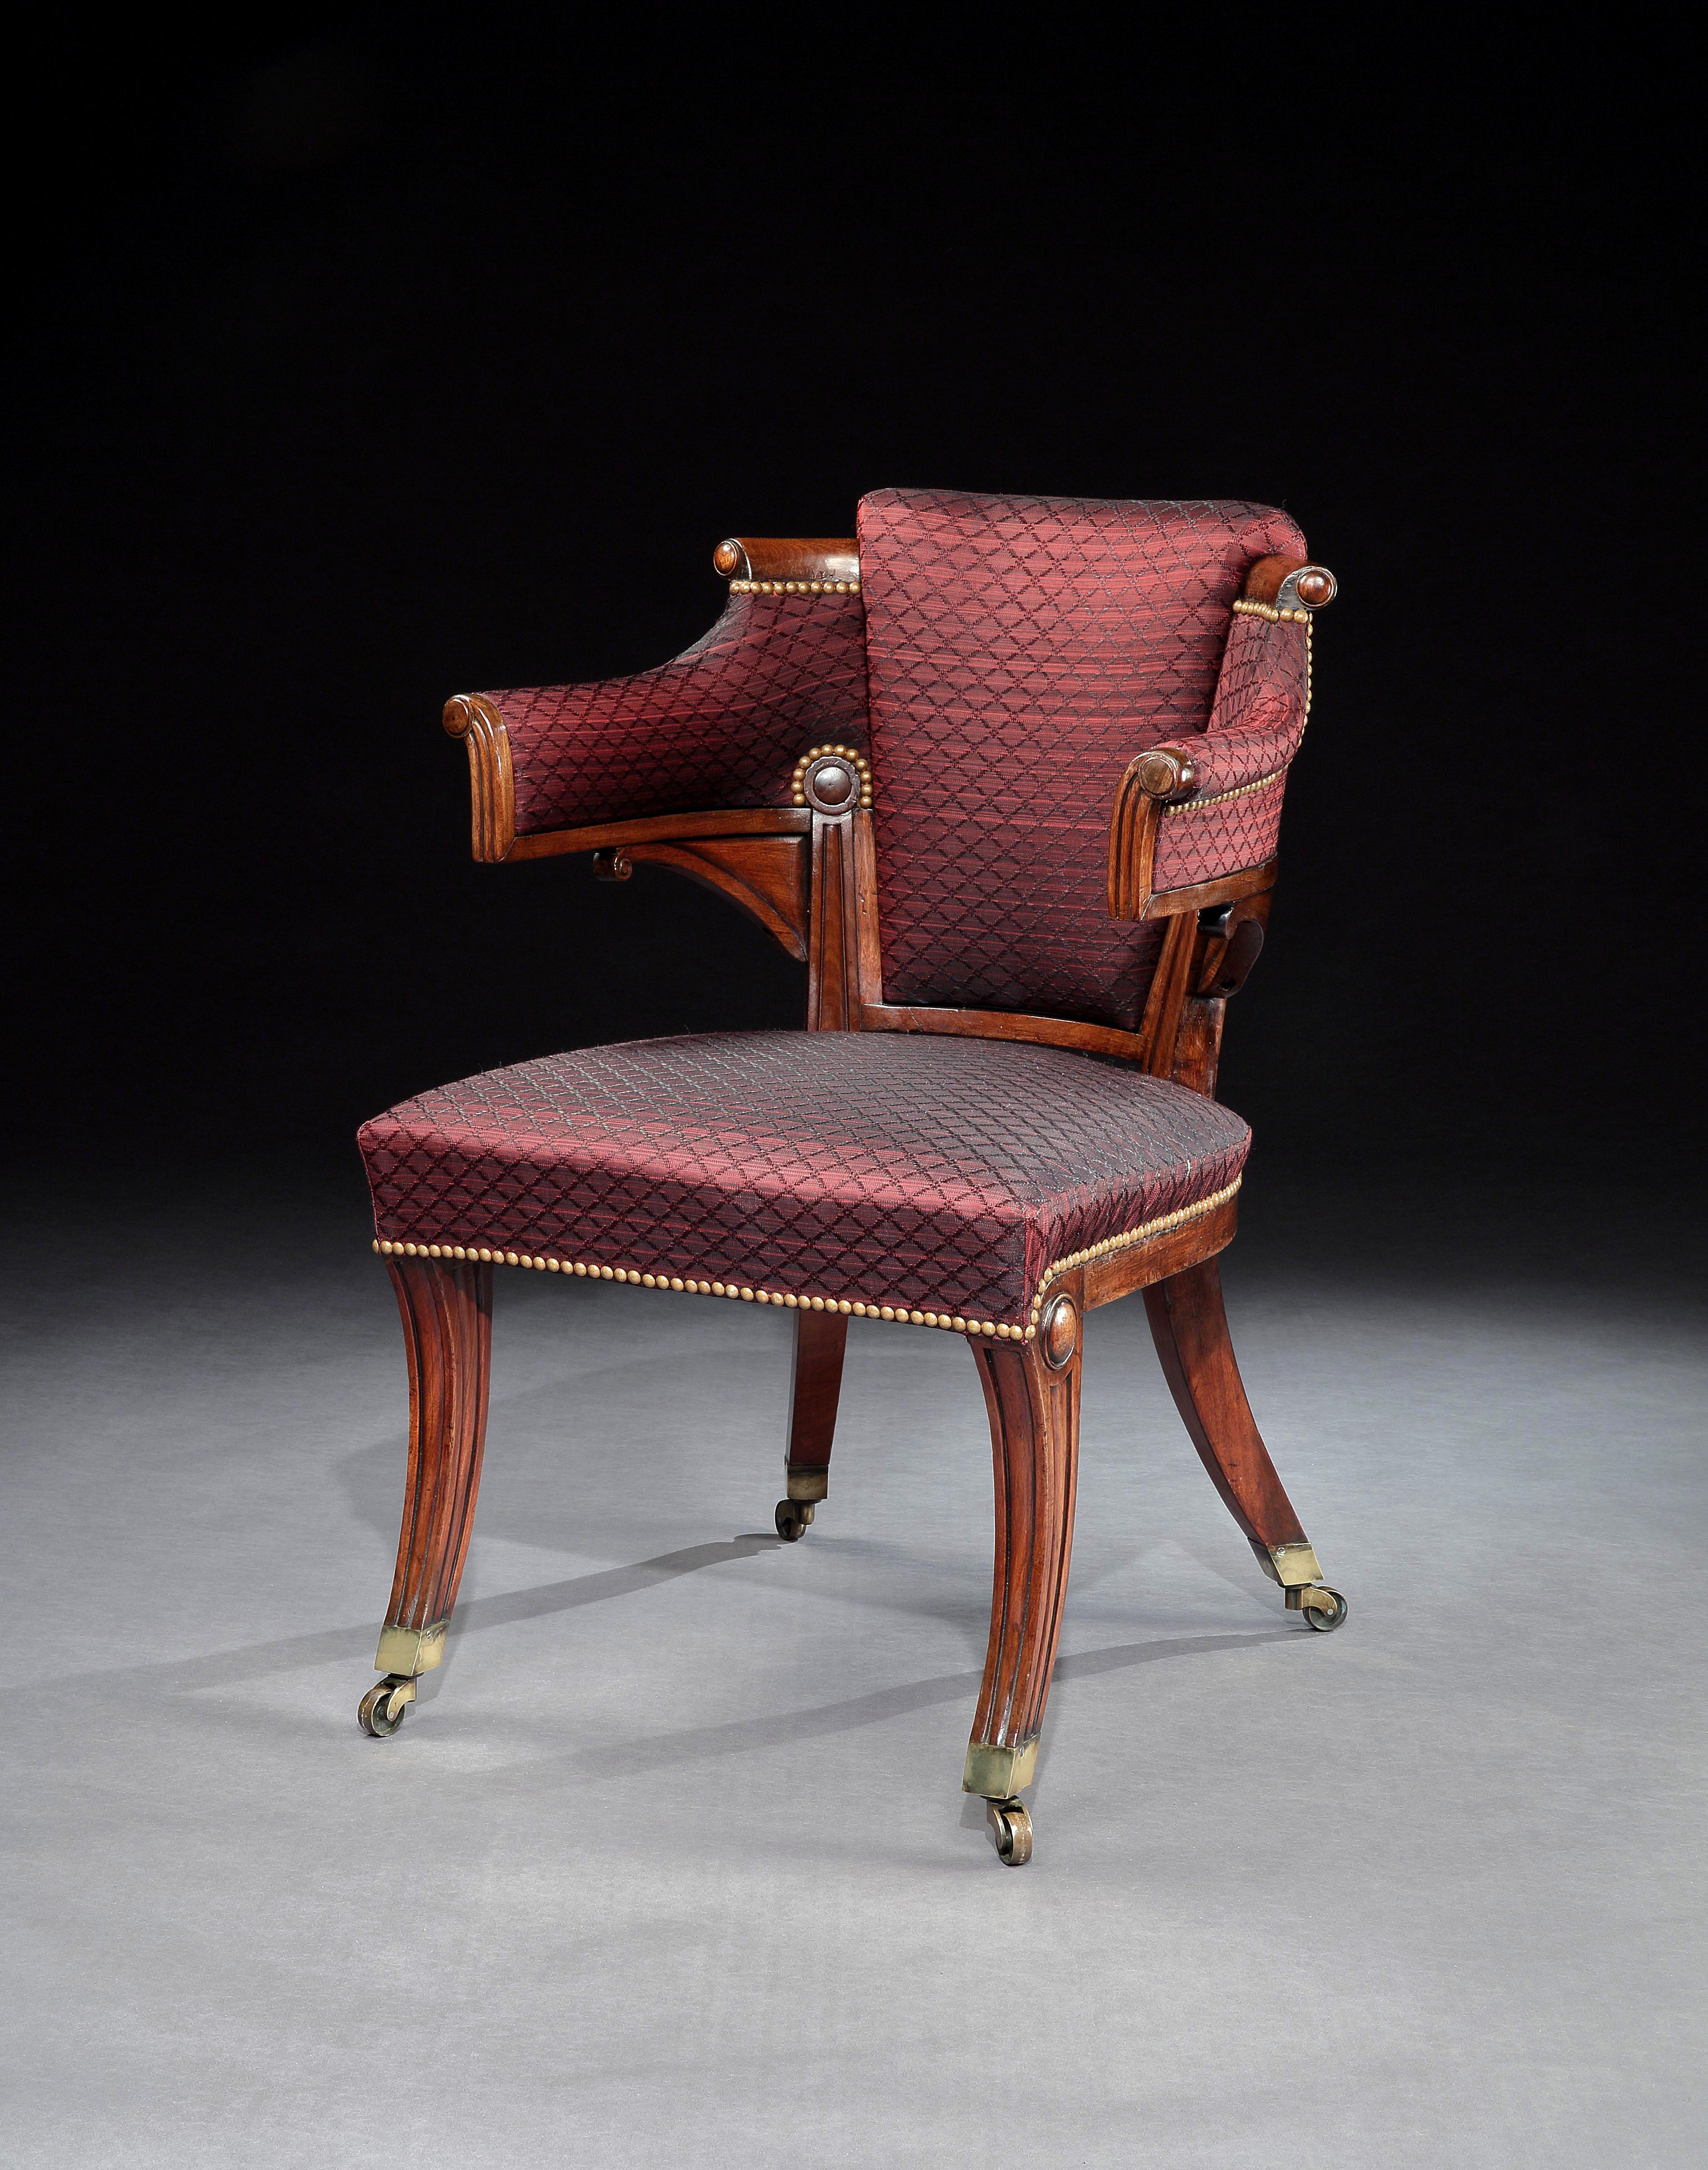 A rare and unusual Regency mahogany armchair of particularly pleasing form with outscrolled arms and standing on molded sabre legs with brass box castors, covered in burgundy horsehair and finished with brass studs.